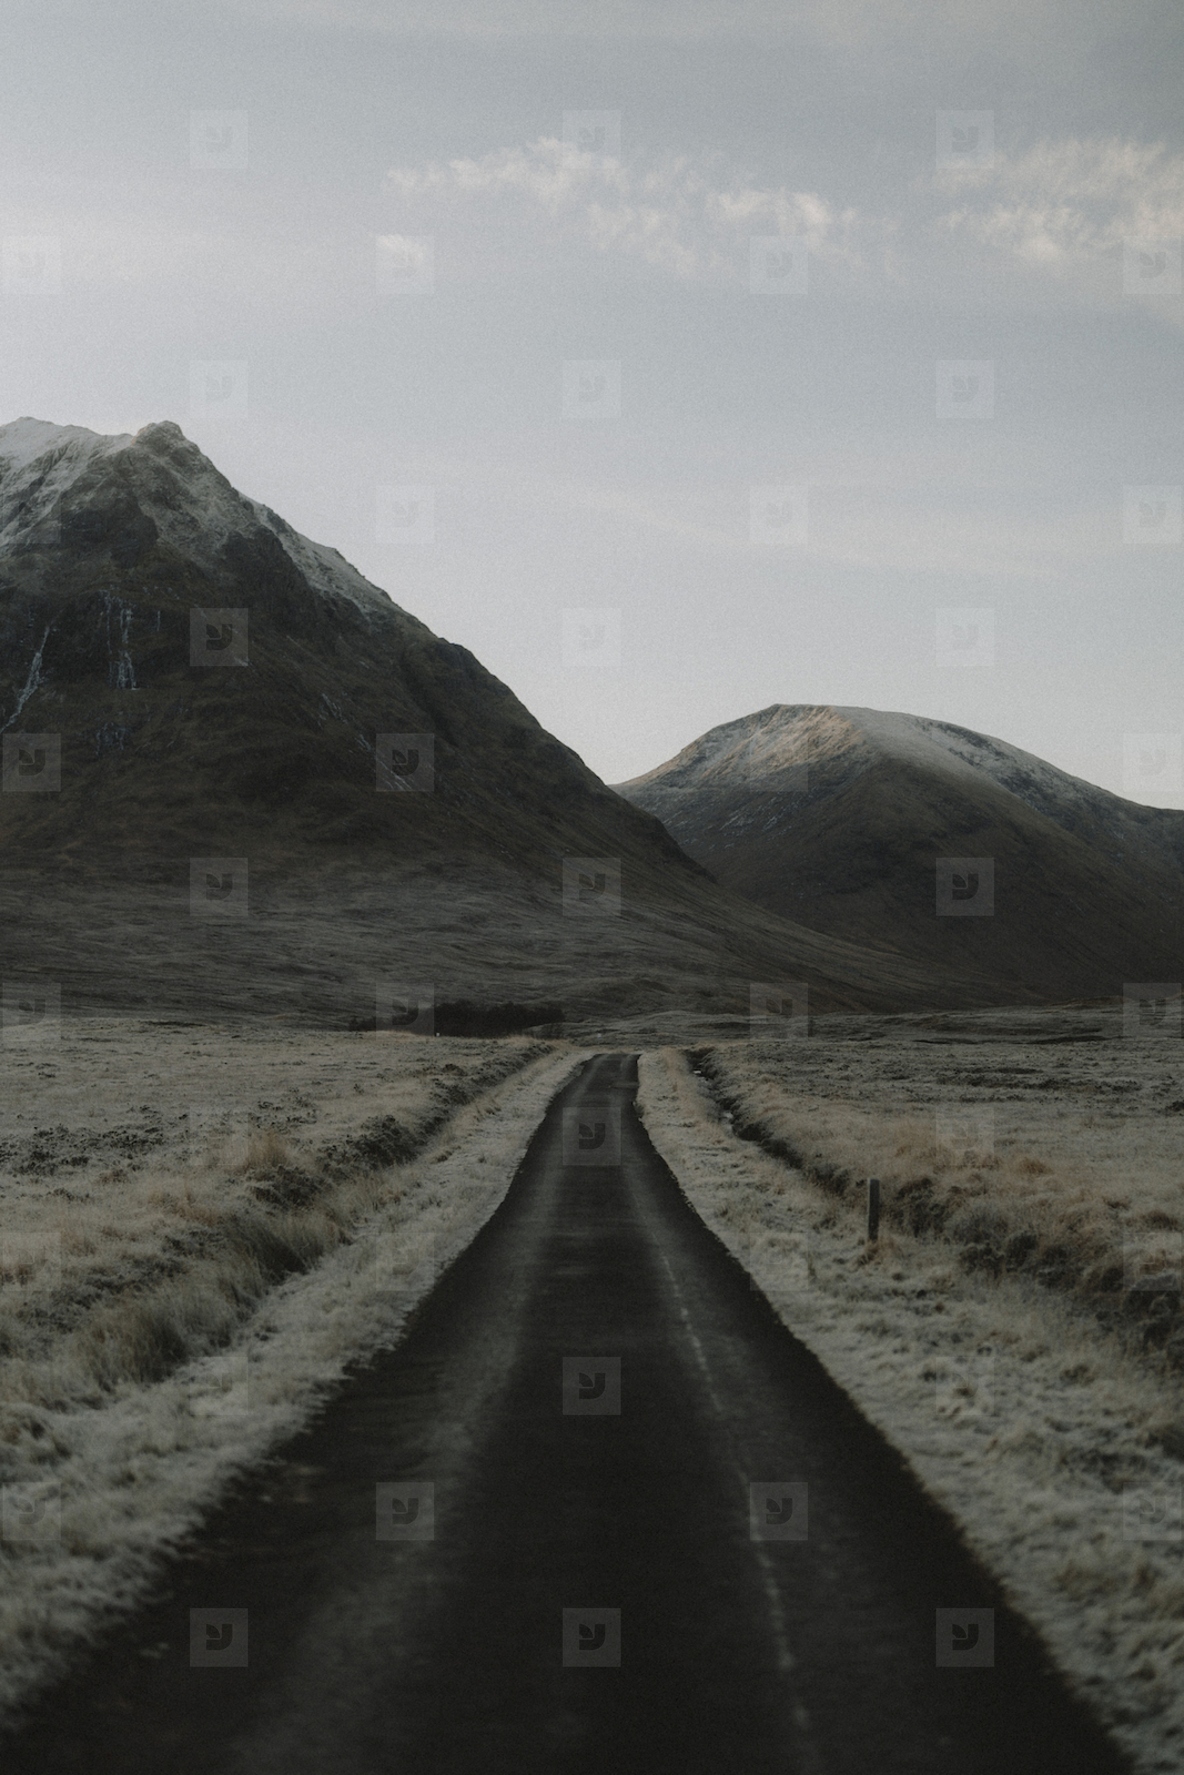 Icy road below tranquil remote mountains